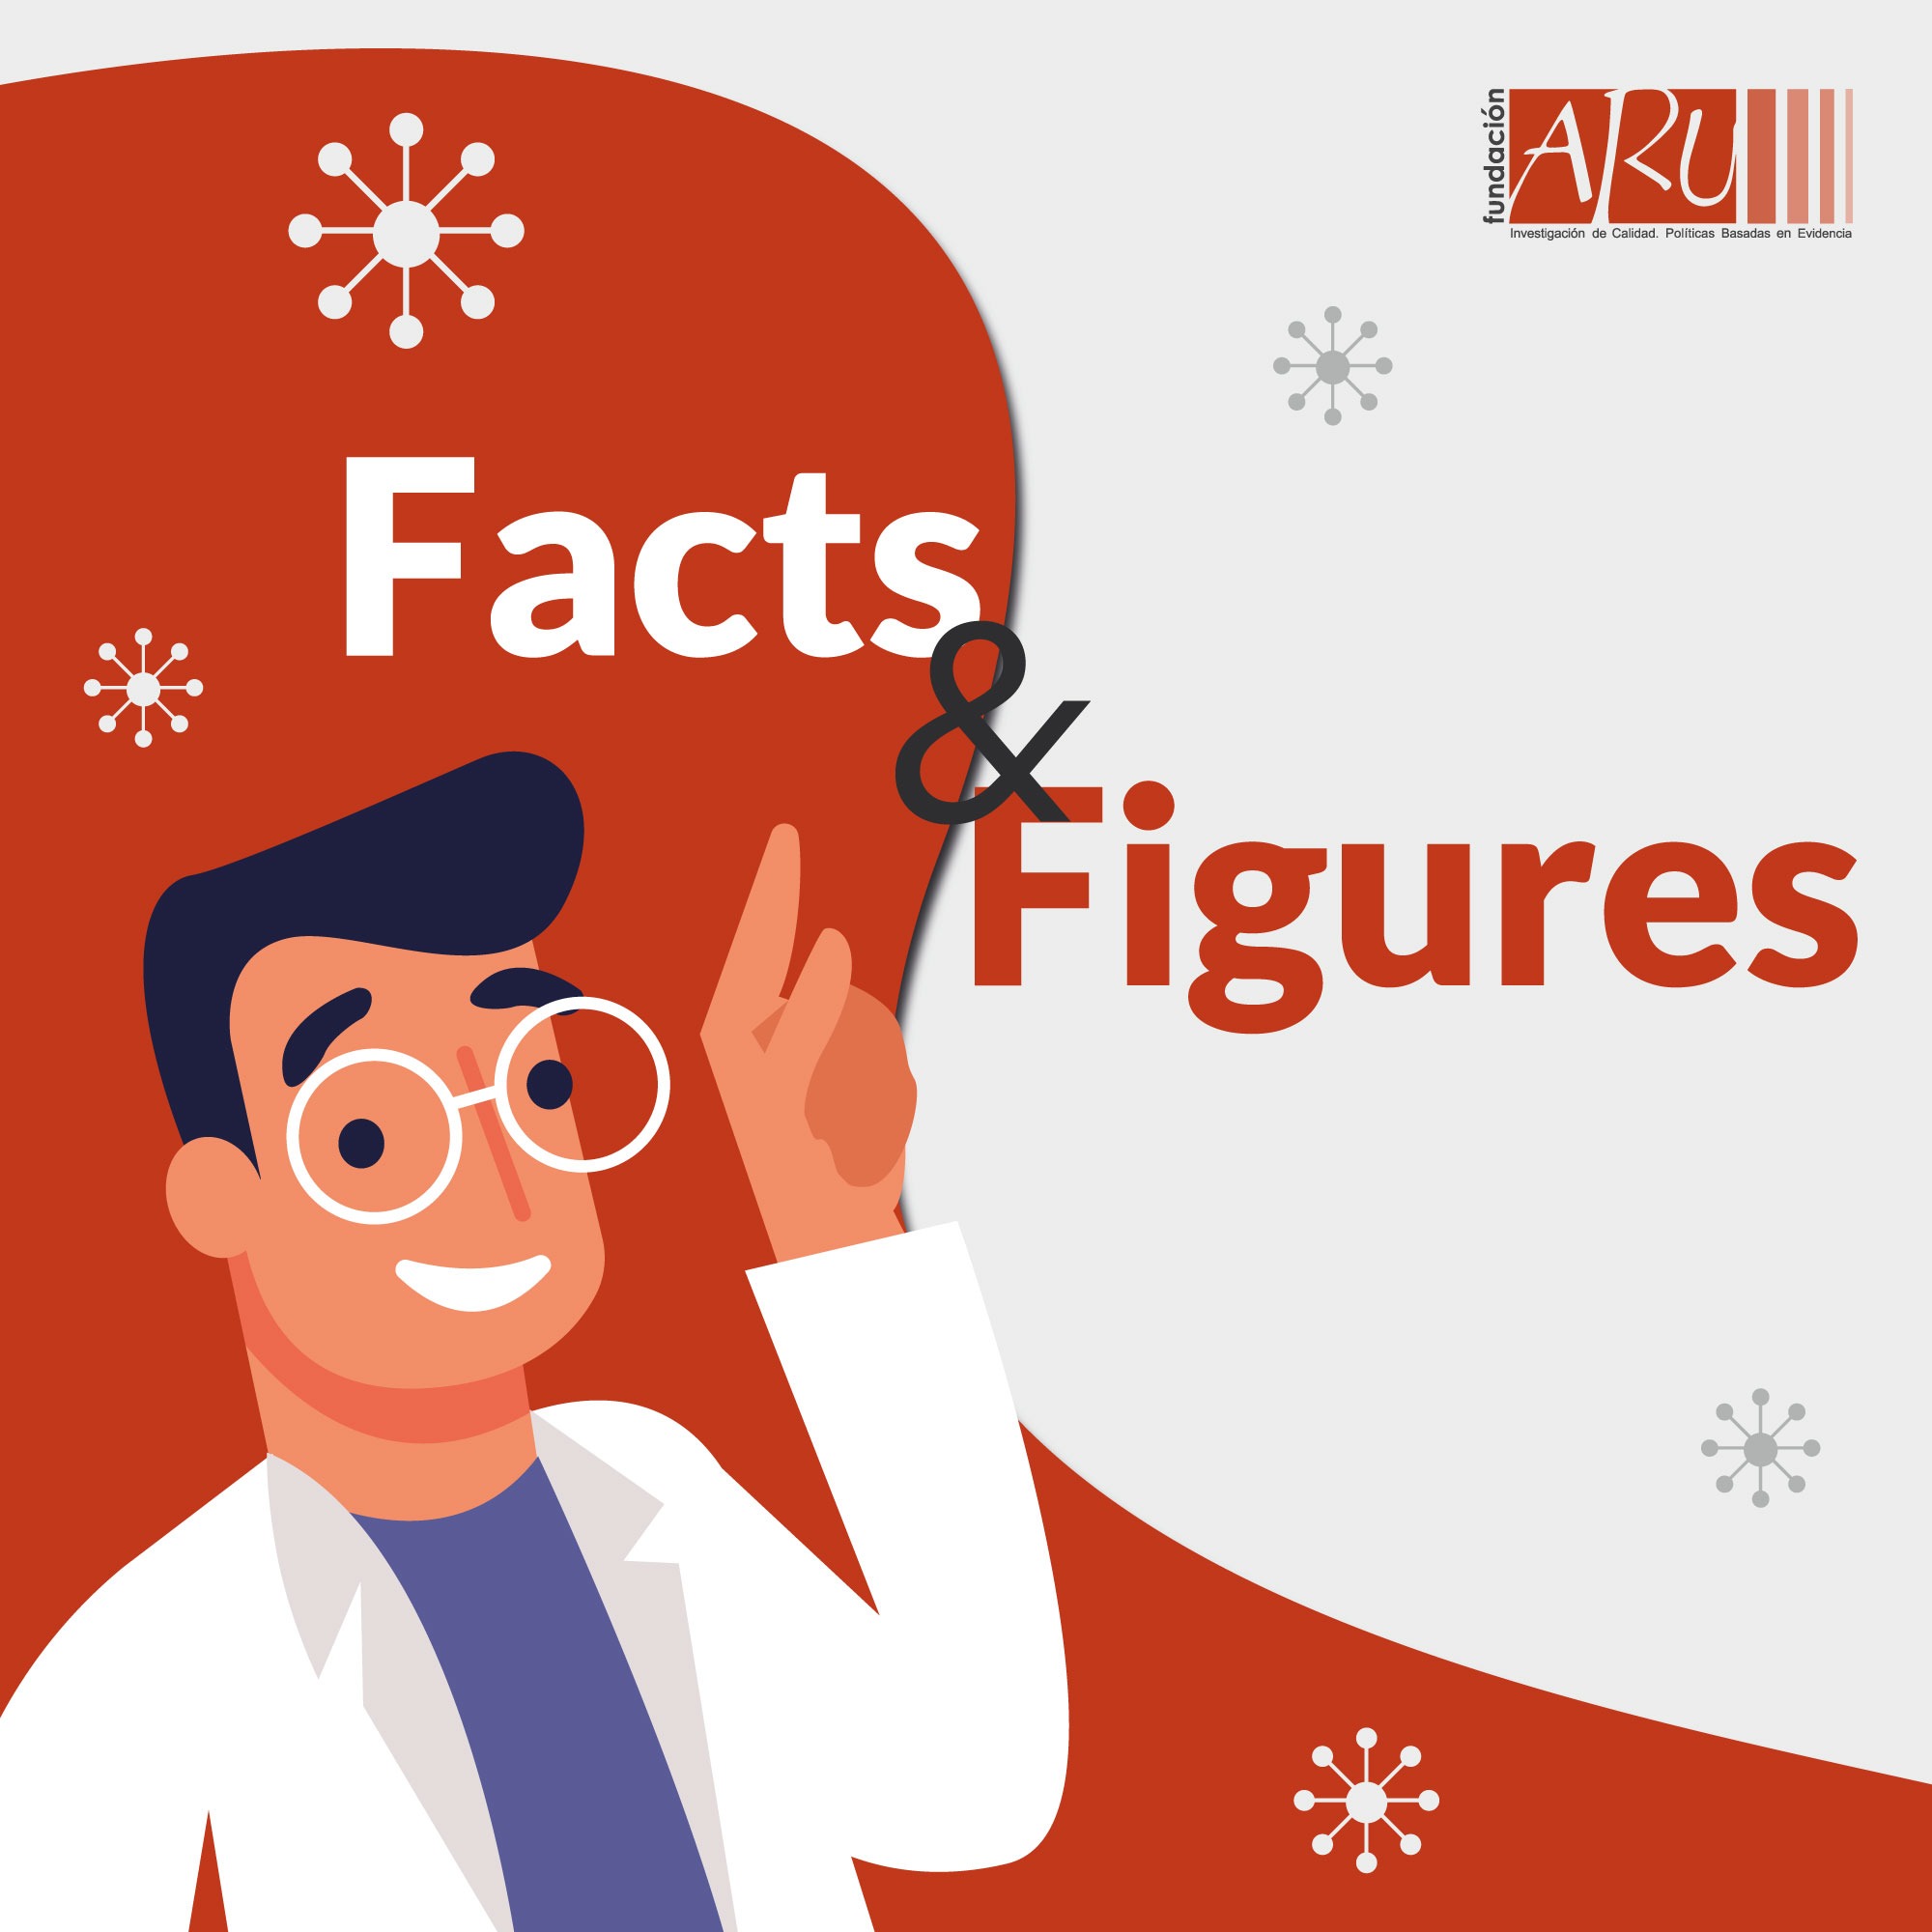 Aru Foundation launches “Facts & Figures”: a section to disseminate data and foster the development of young researchers